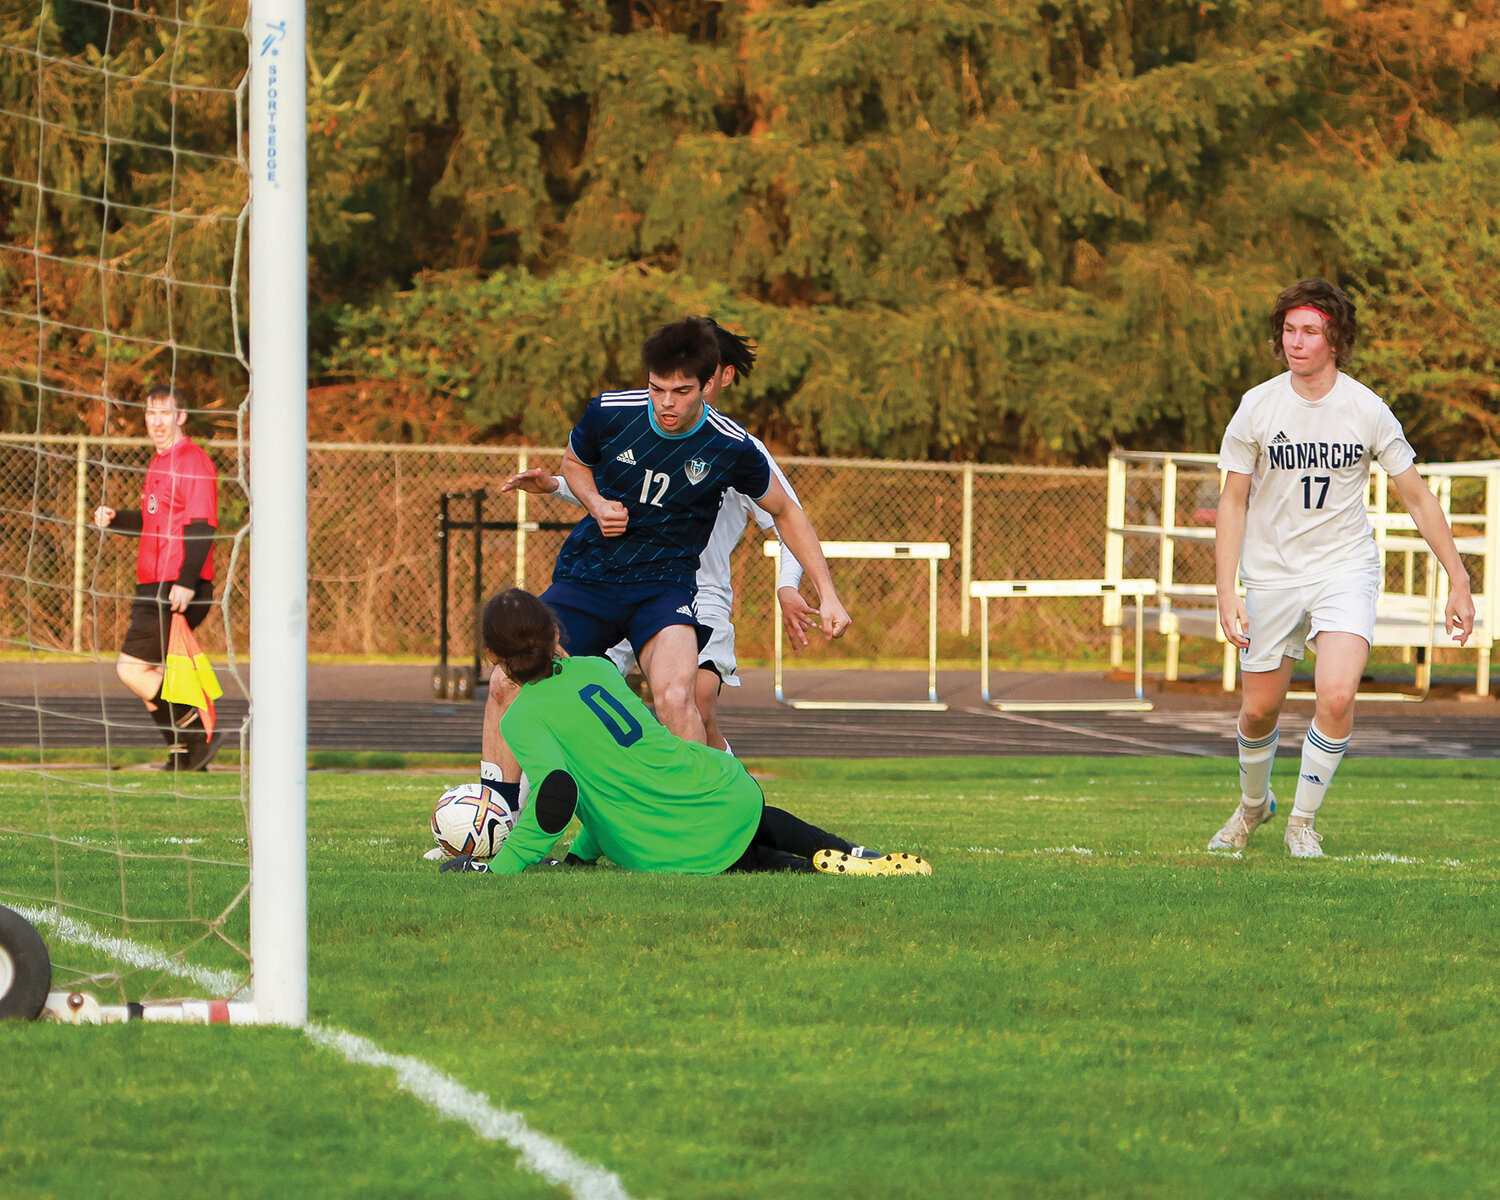 Hockinson's John Charles gets past the keeper for his first of two goals during the team's 7-0 victory over Mark Morris on Tuesday, May 2.